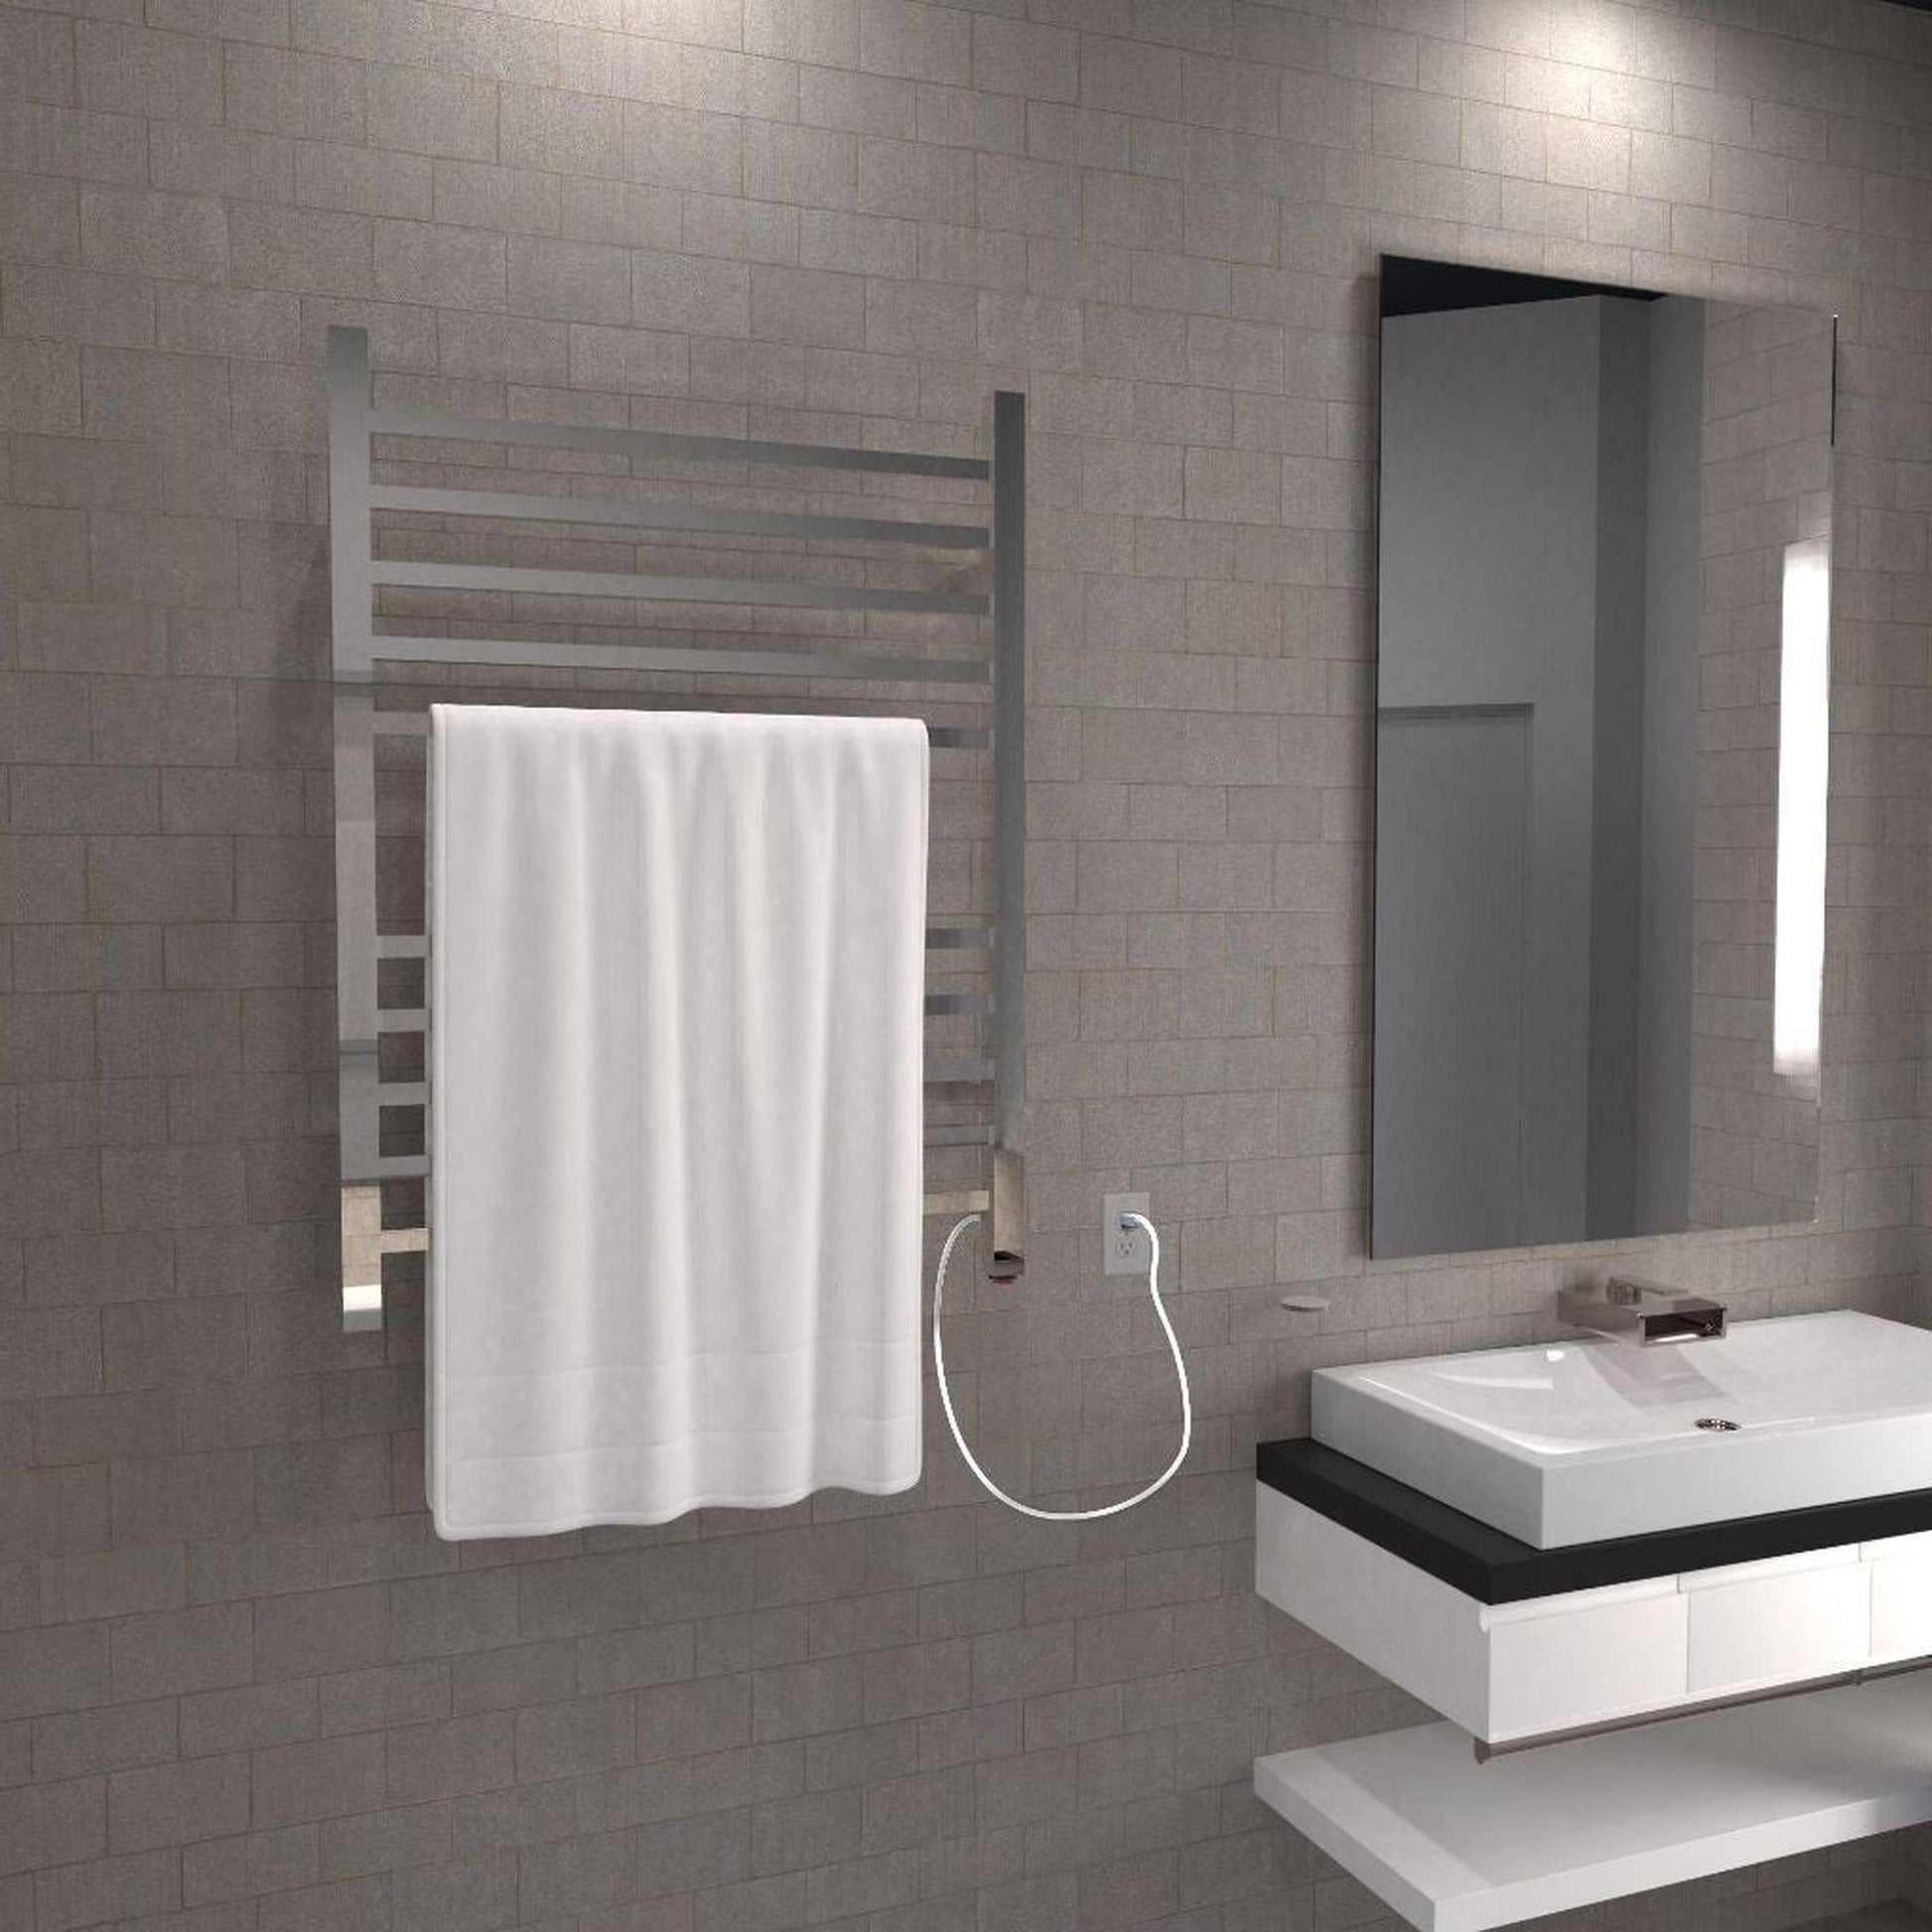 Amba Radiant Square 10-Bar Polished Stainless Steel Plug-In Towel Warmer